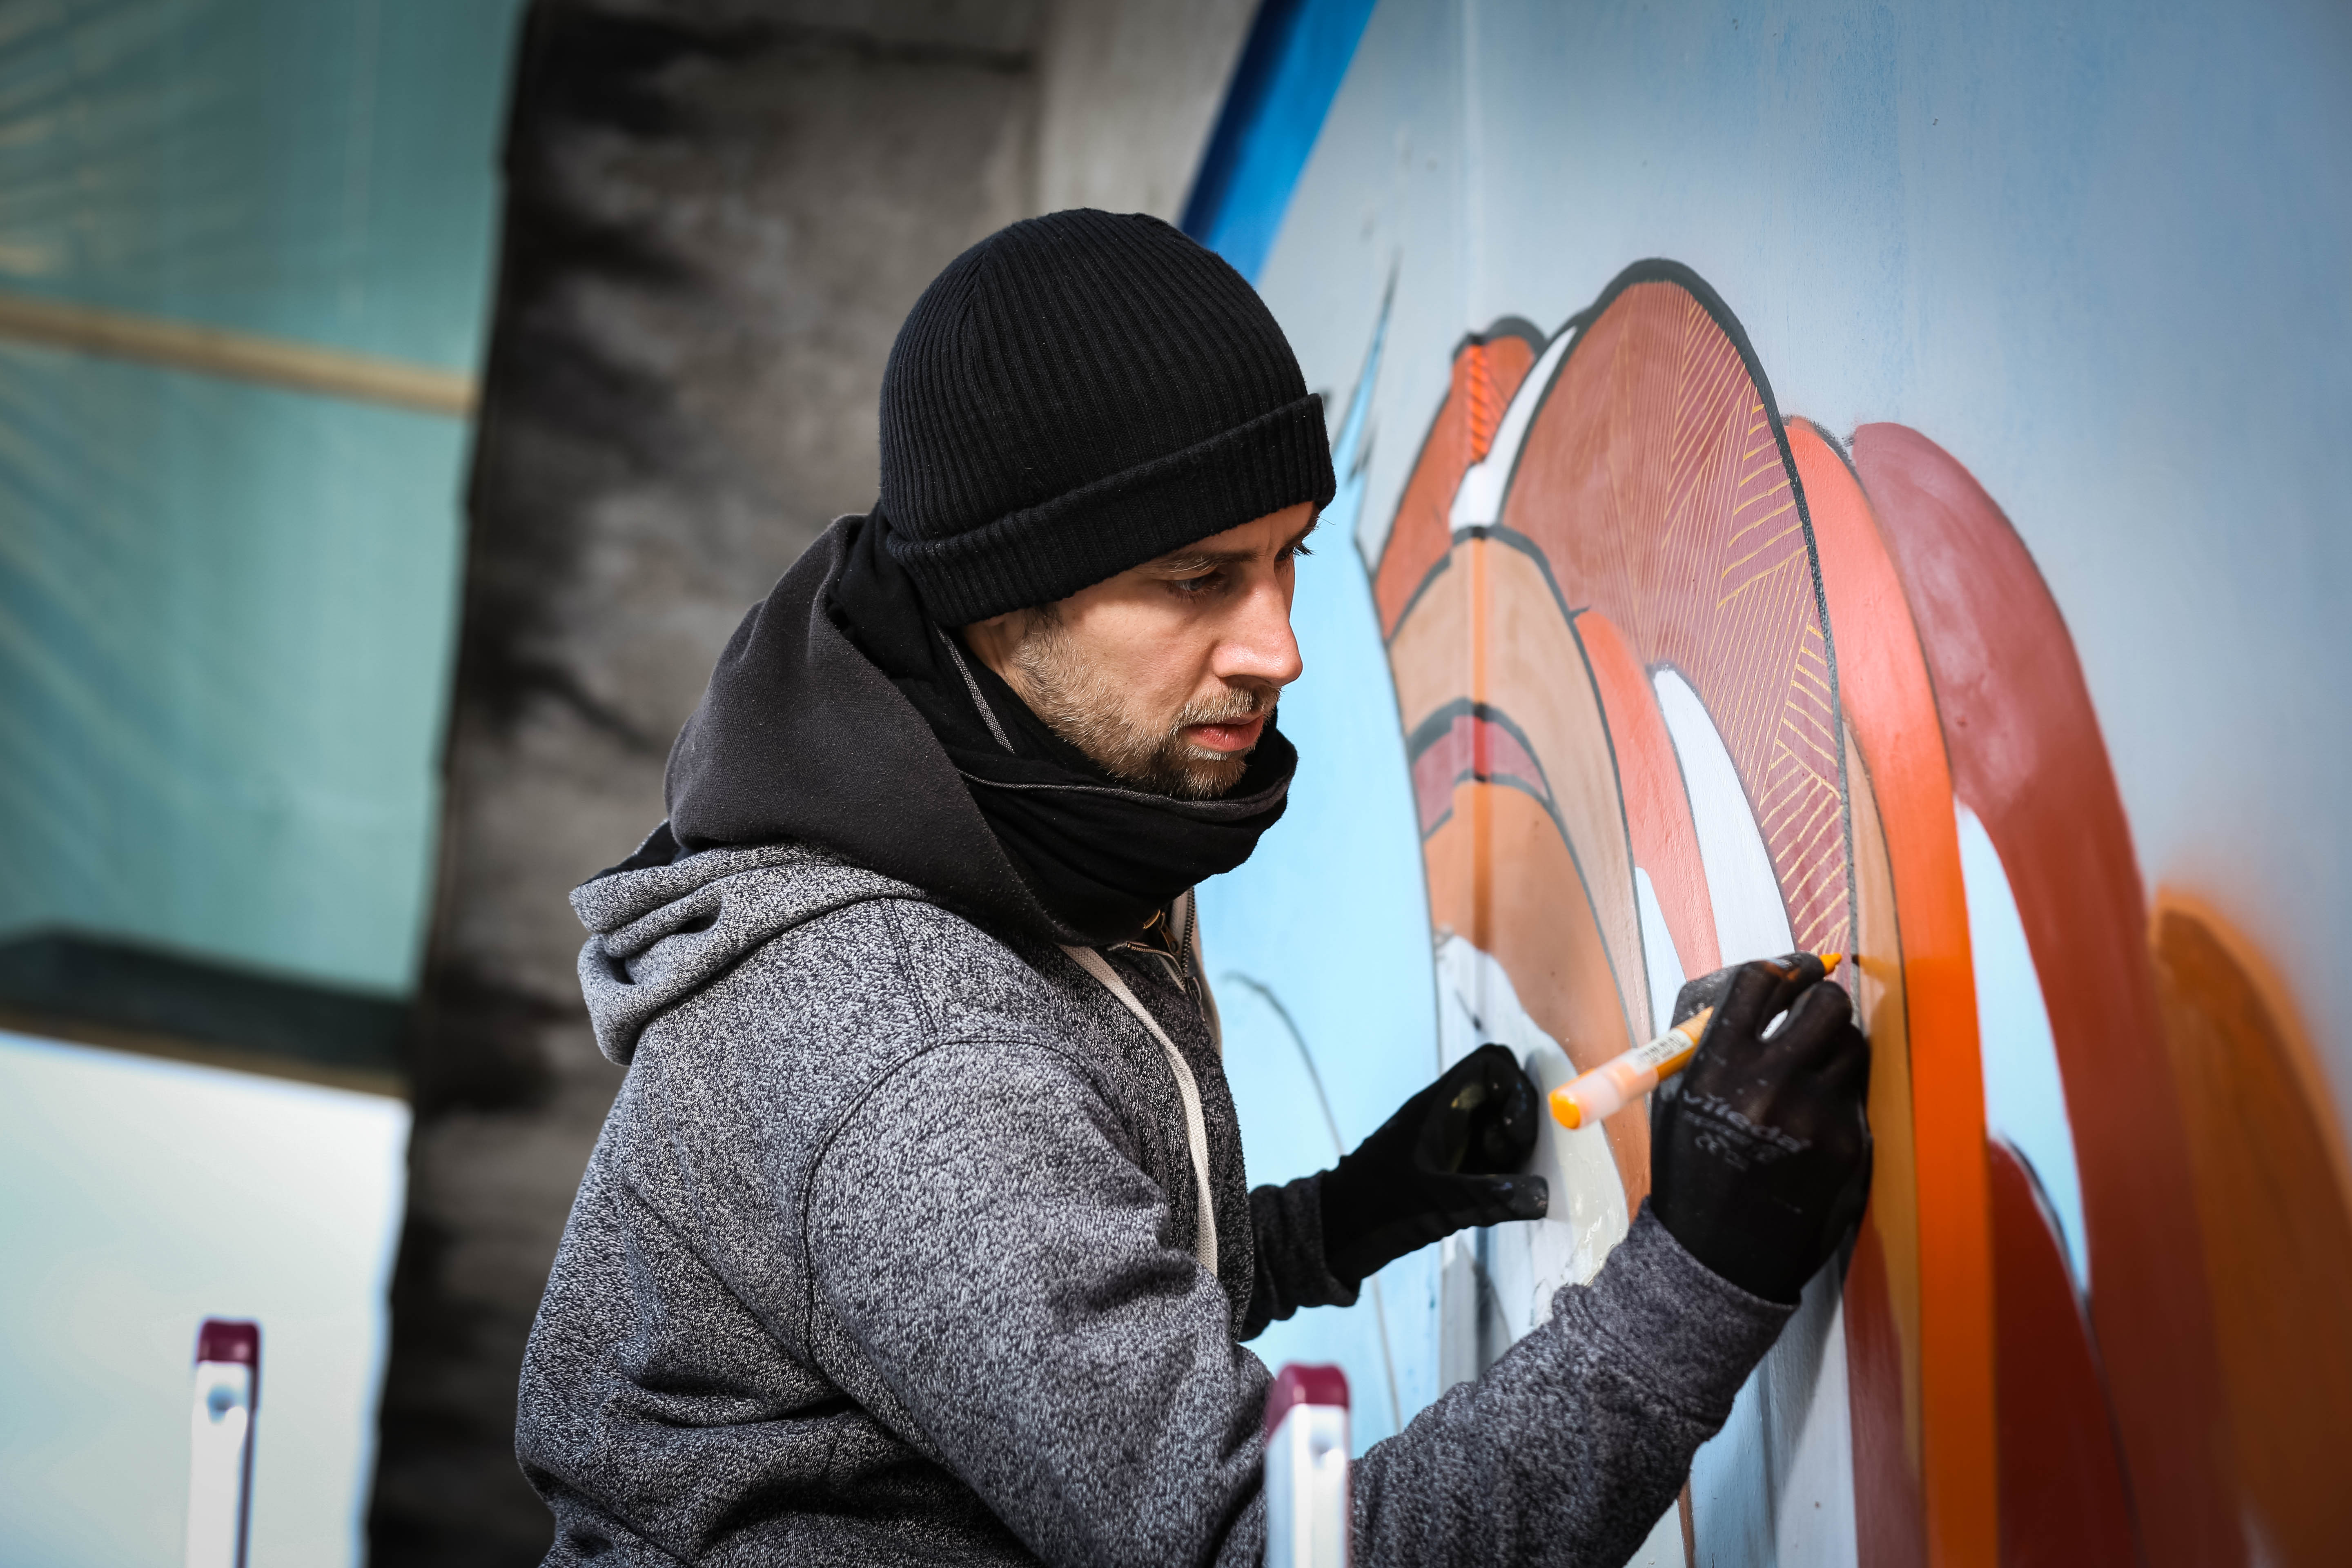 Andreas Preis painting his wolf mural.